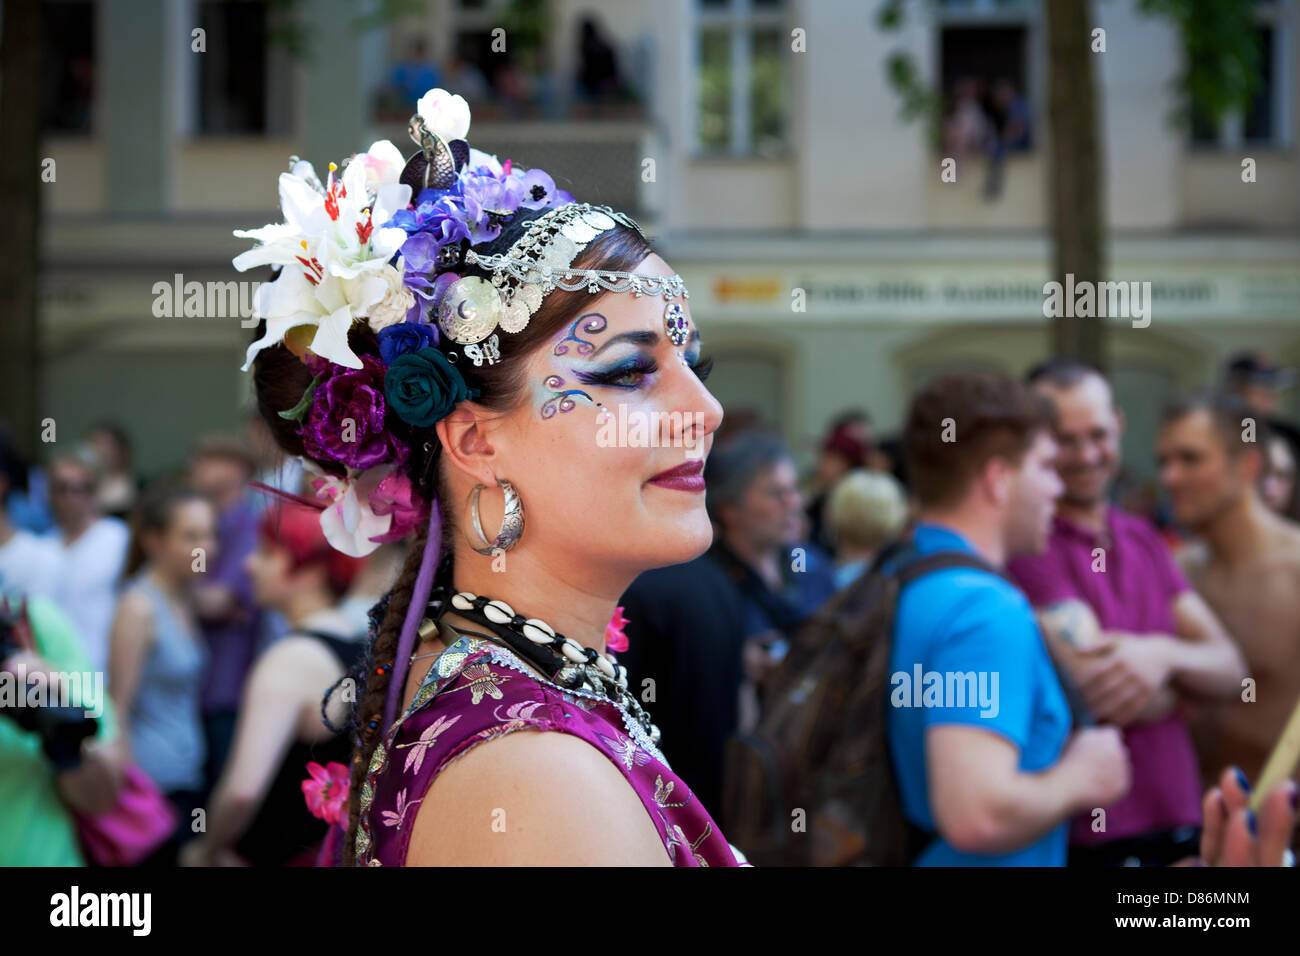 Berlin, Germany. 19th May 2013. Karneval der Kulturen - Annual Carnival and street party in Germany's Capital Berlin. Credit:  Rey T. Byhre / Alamy Live News Stock Photo